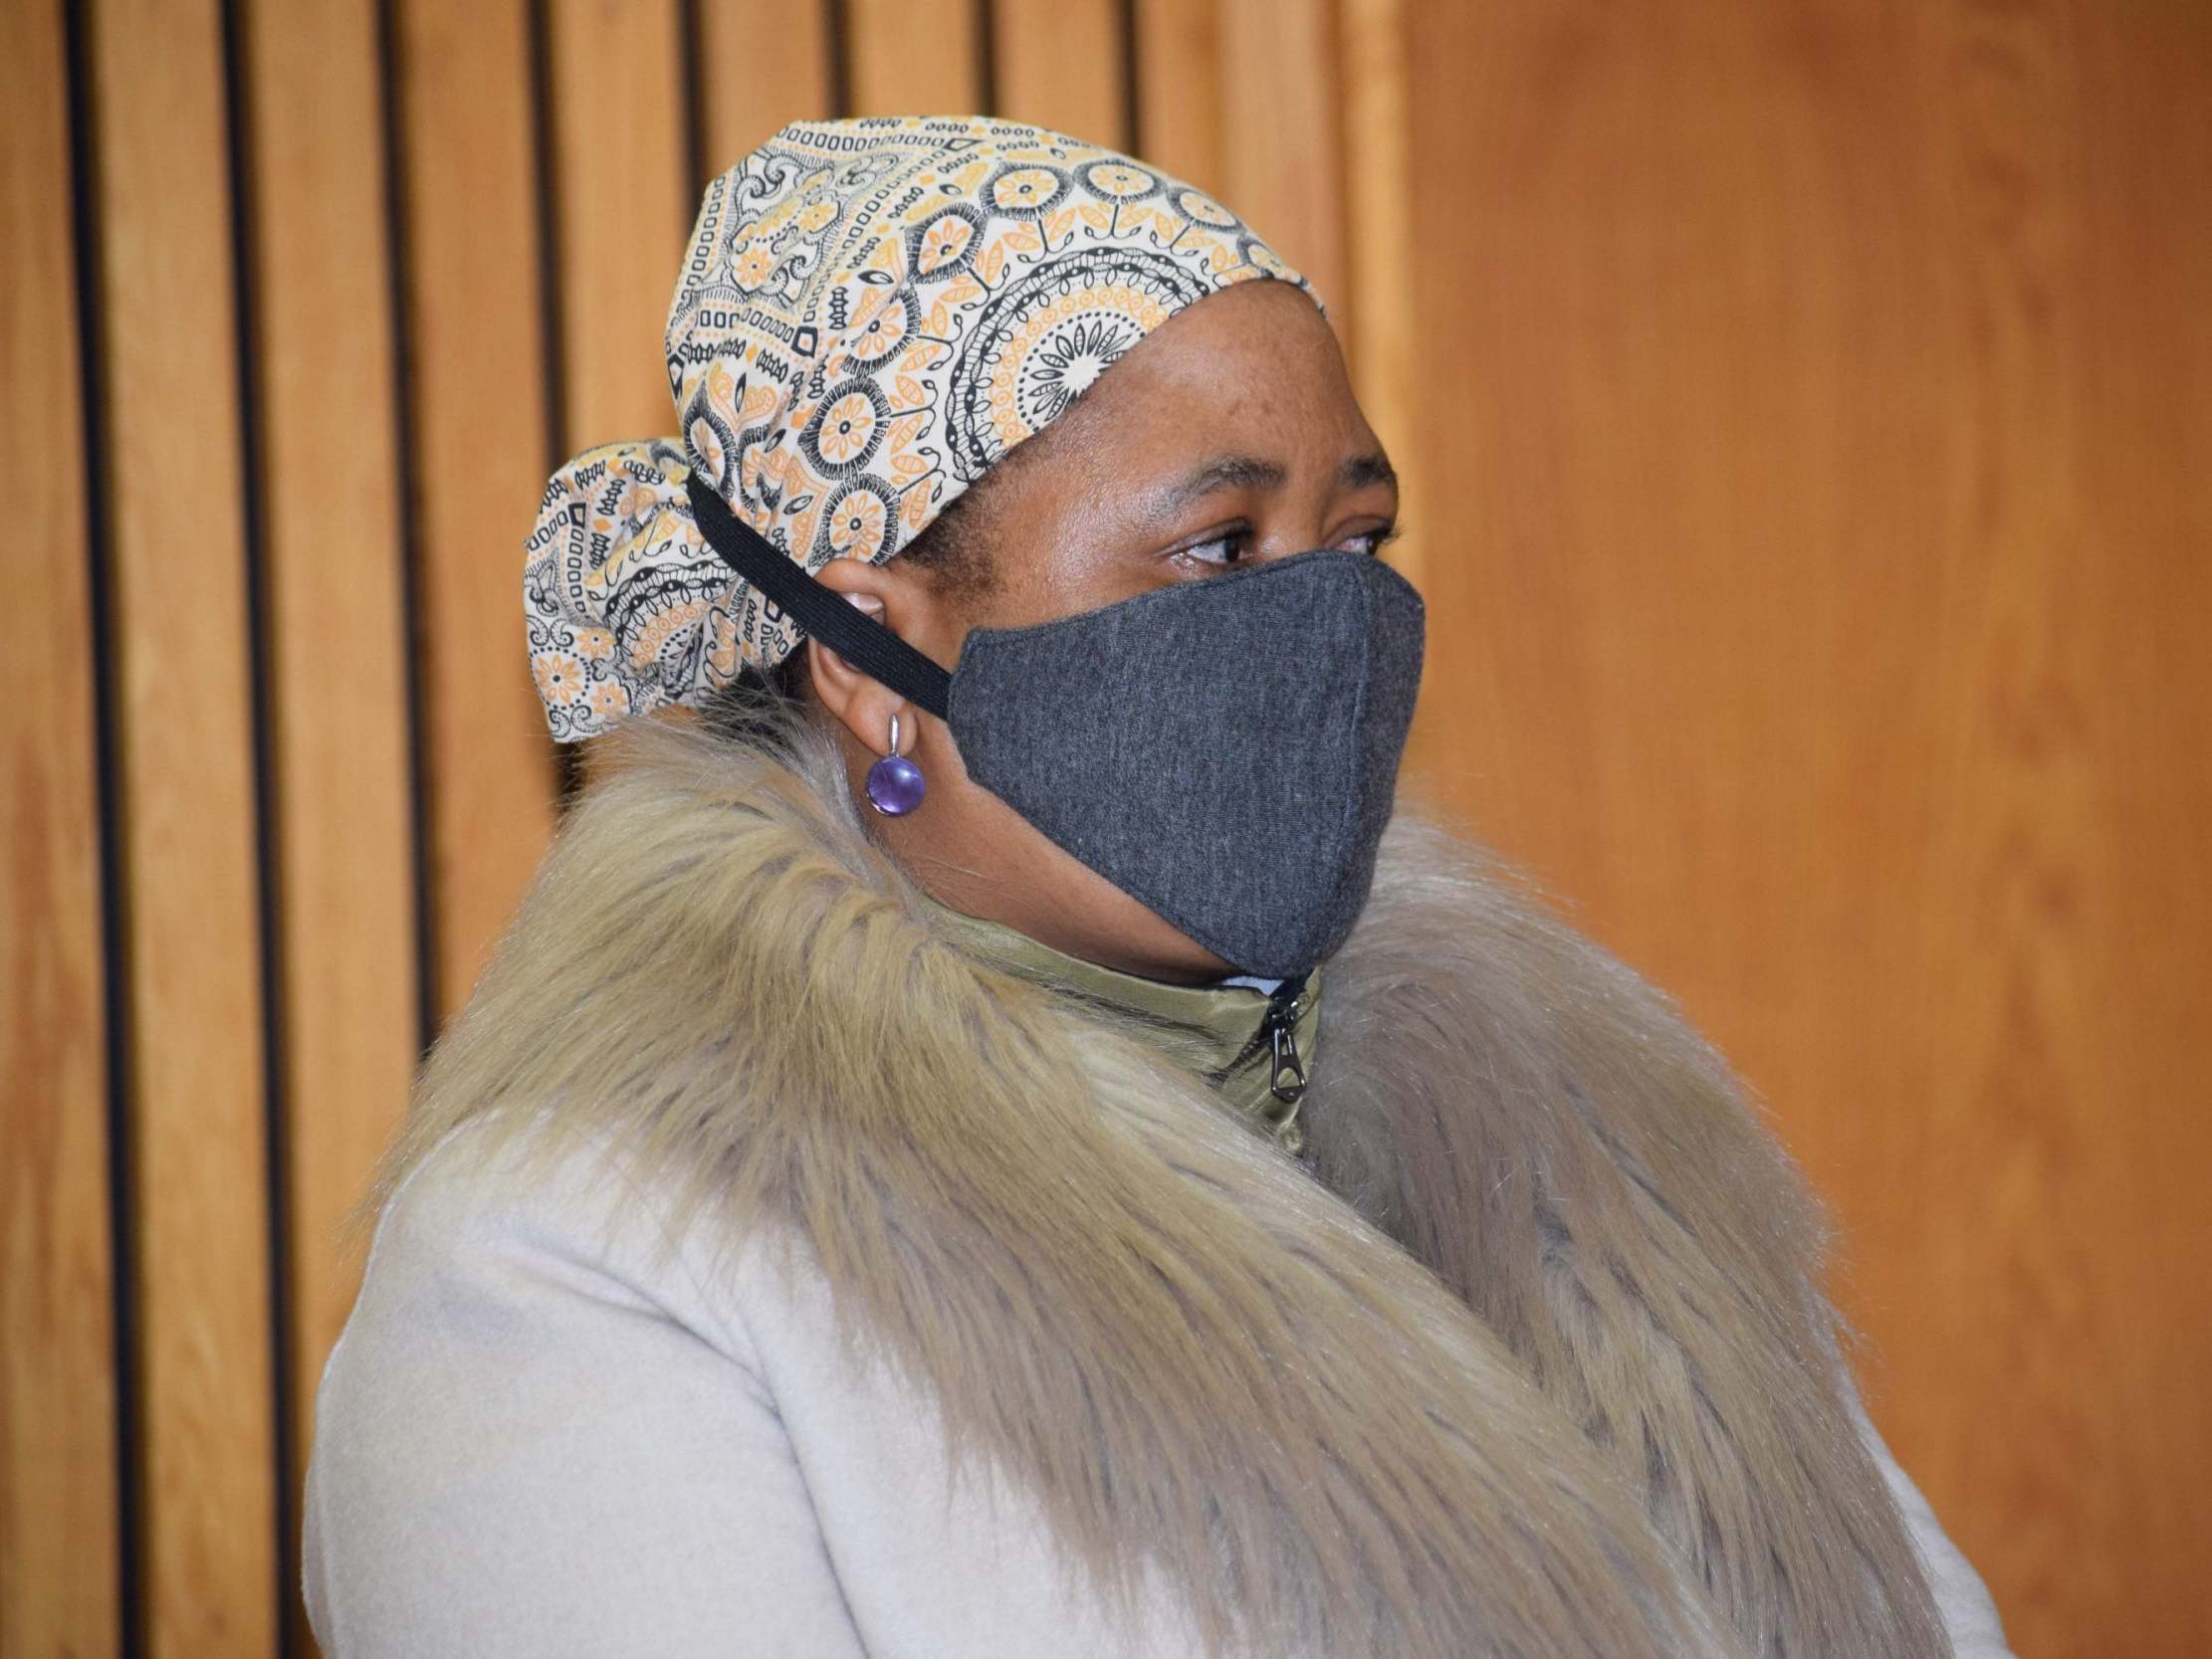 Maesaiah Thabane appeared in magistrate's court on Wednesday